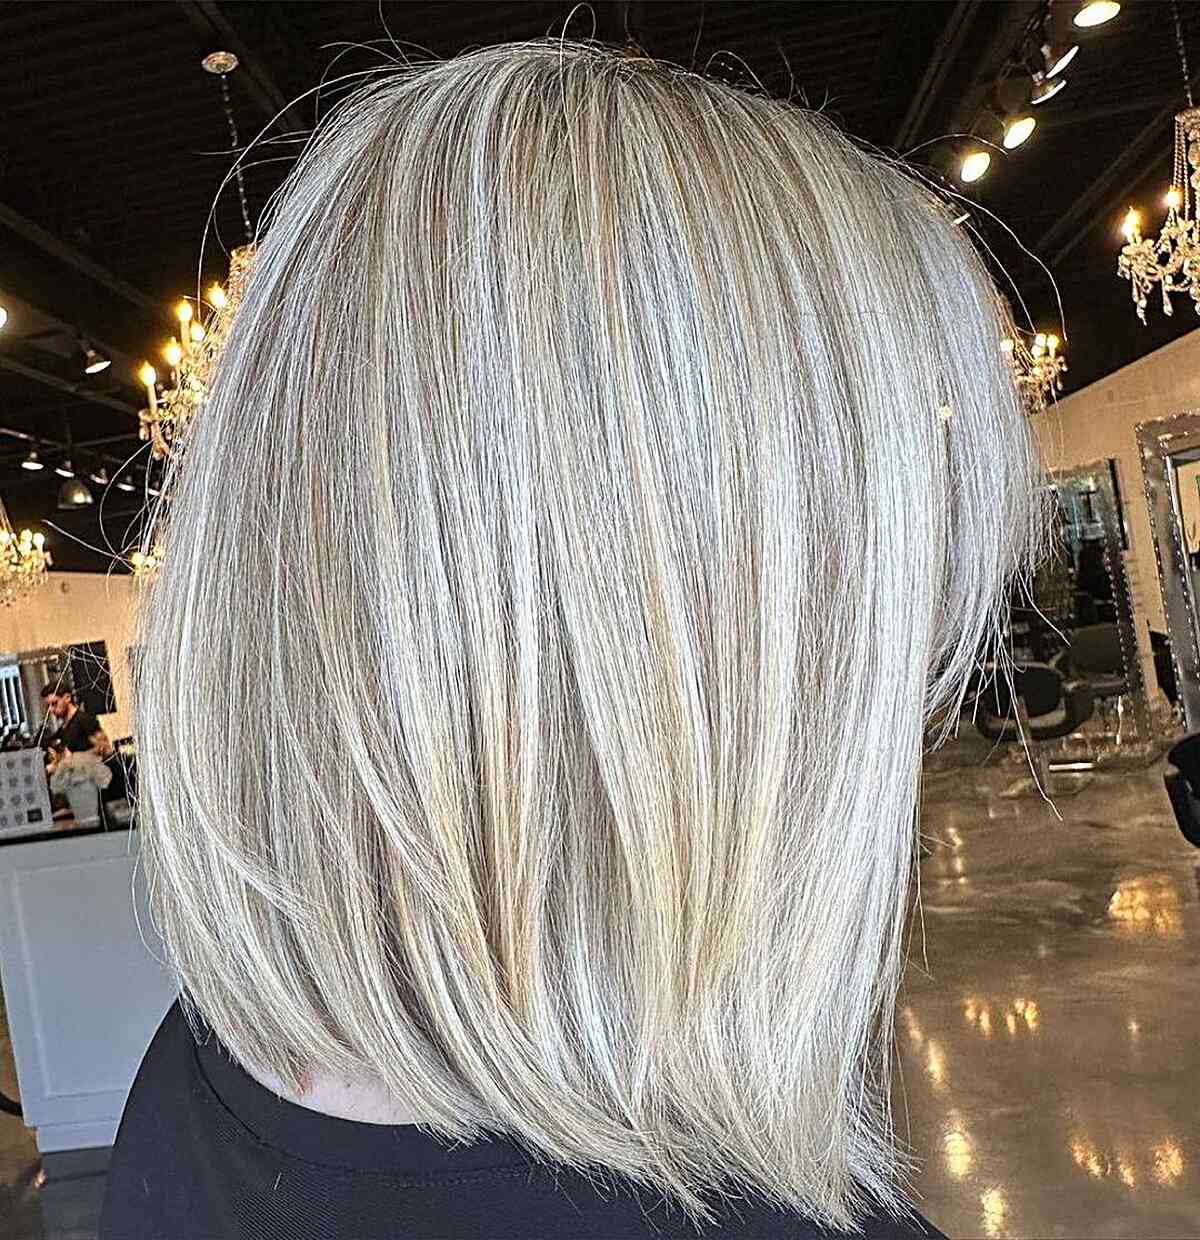 Shoulder-Length Straight Blonde Balayage Lob with Brown Lowlights